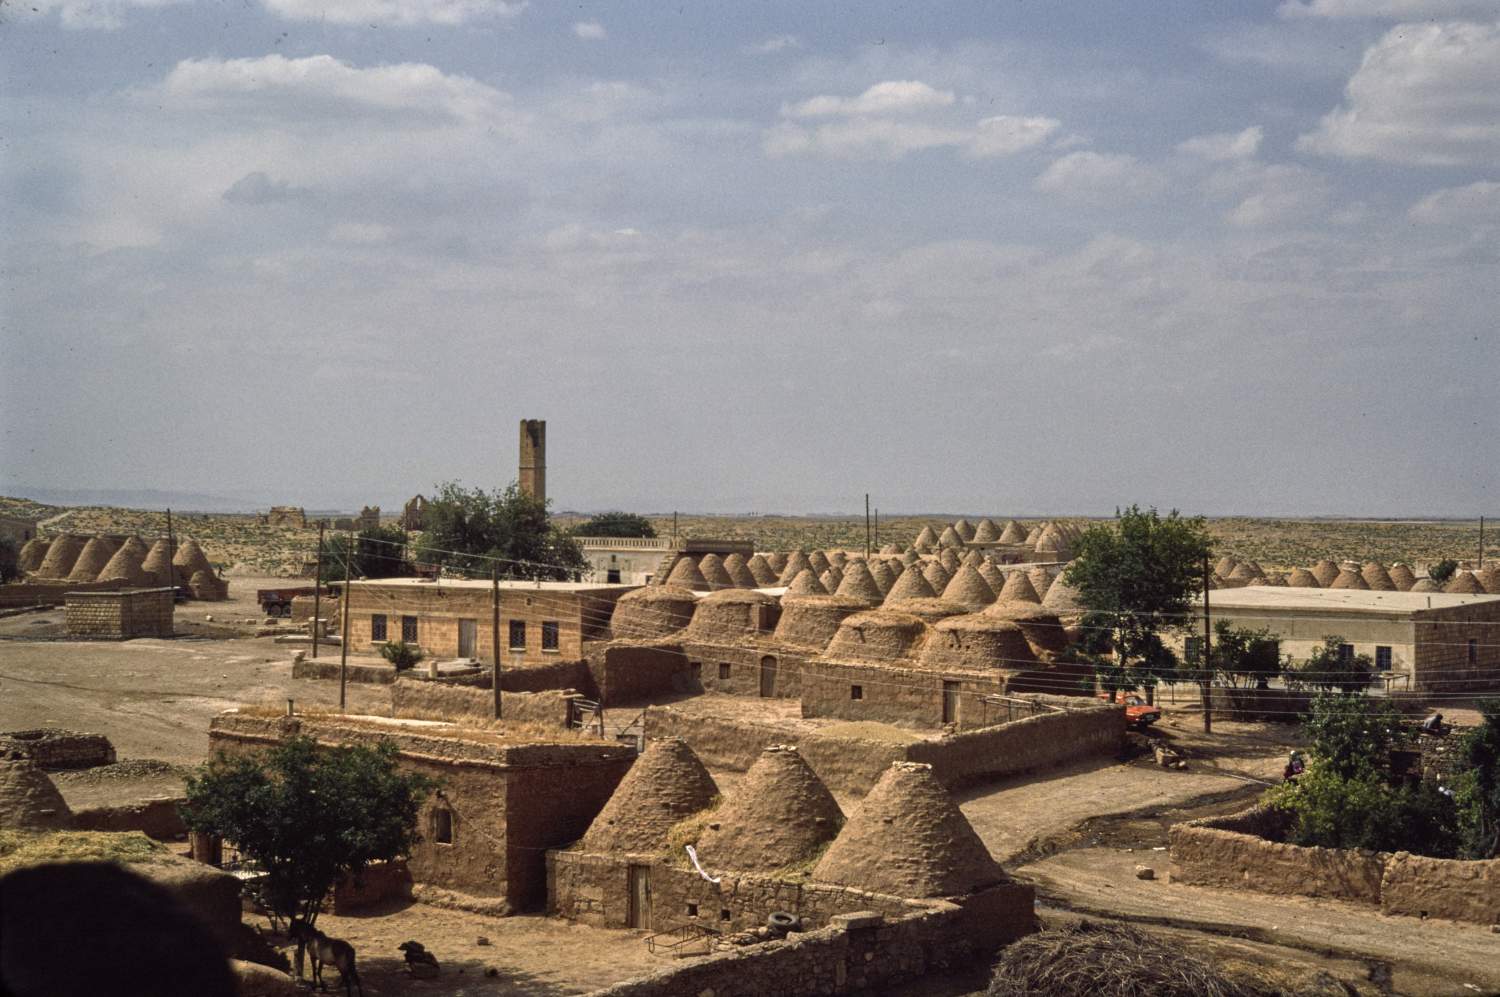 View over town with traditional beehive houses in foreground and minaret of Great Mosque visible in background.